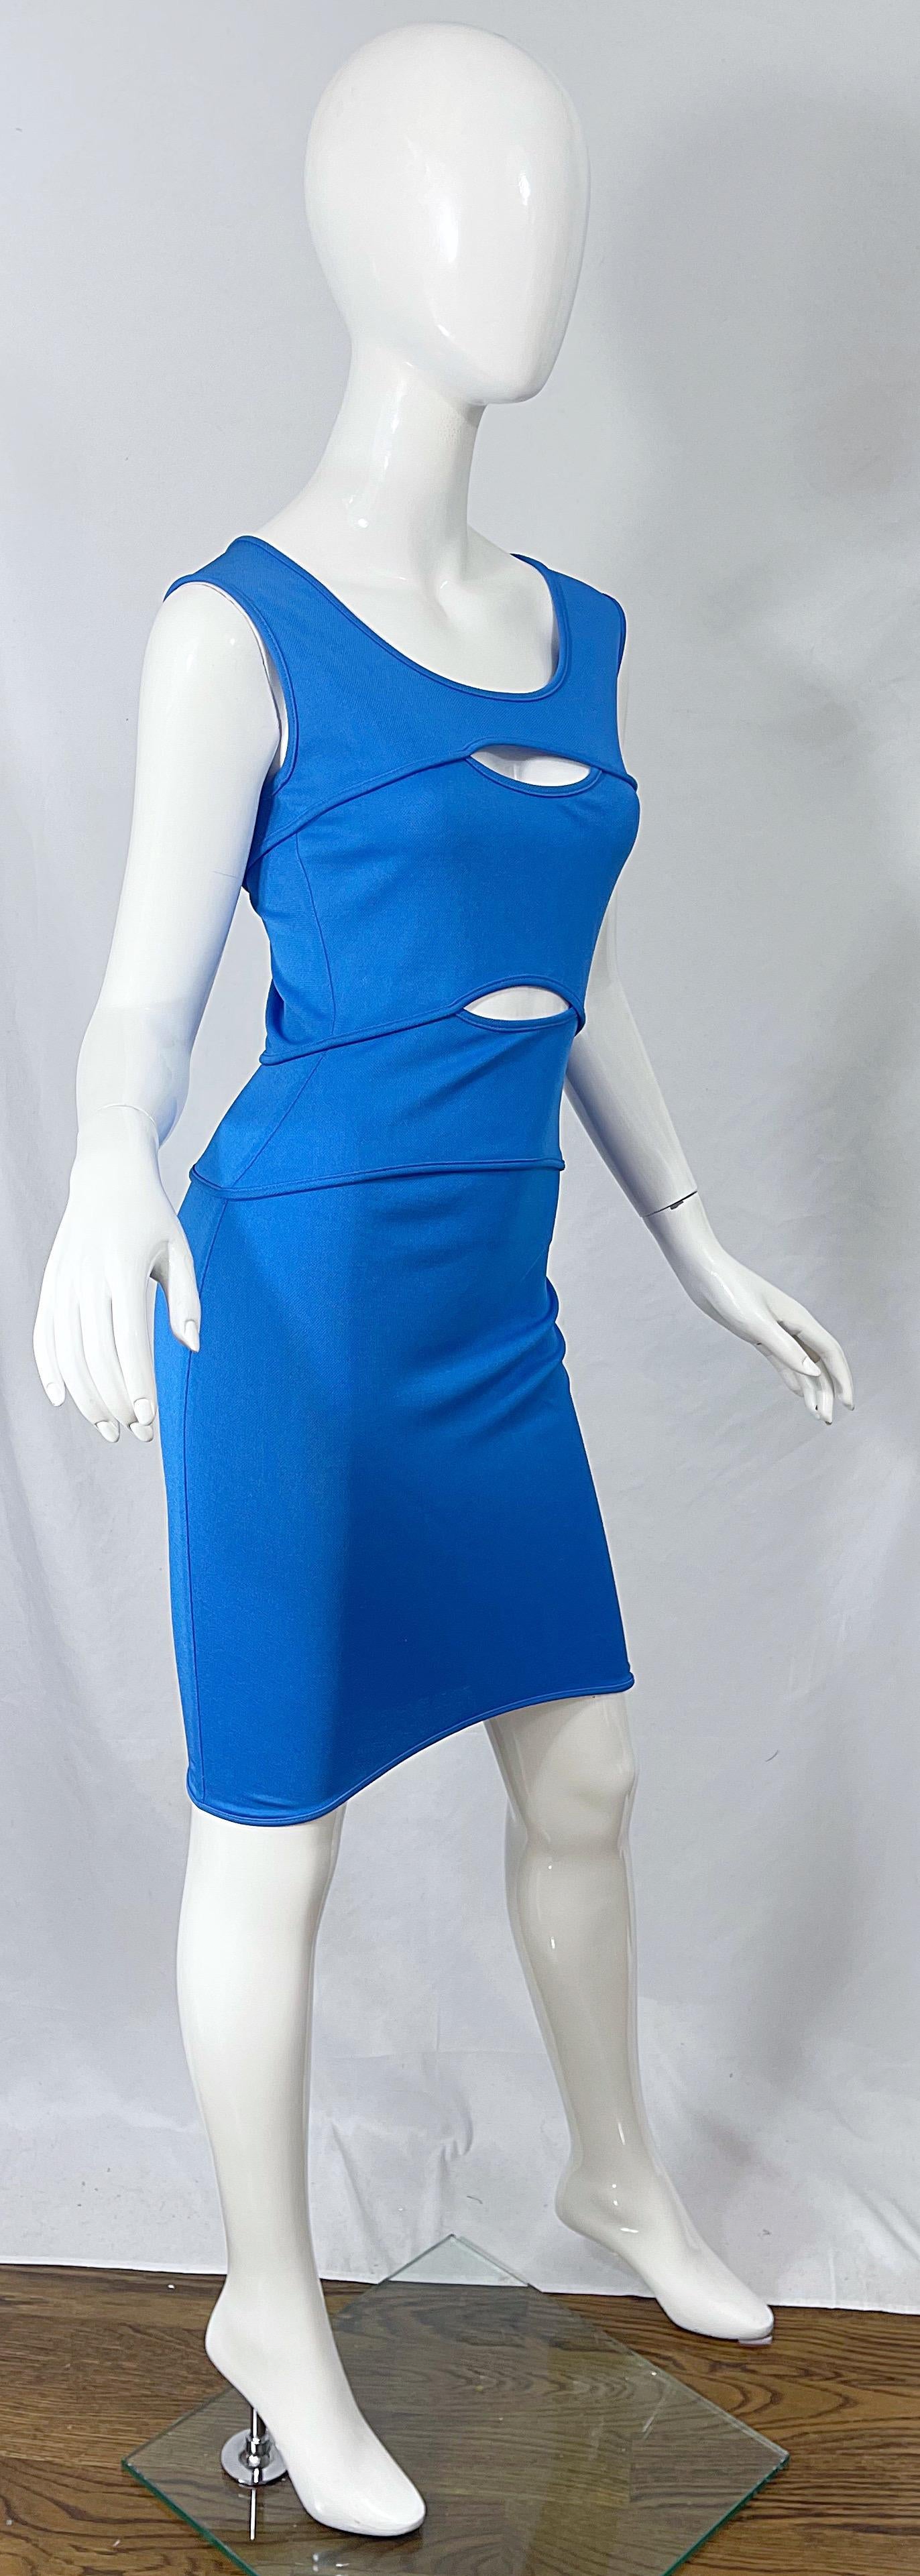 Thierry Mugler 1990s Blue Cut Out Vintage Body Con 90s Dress Size 44 / 6 - 8 For Sale 3